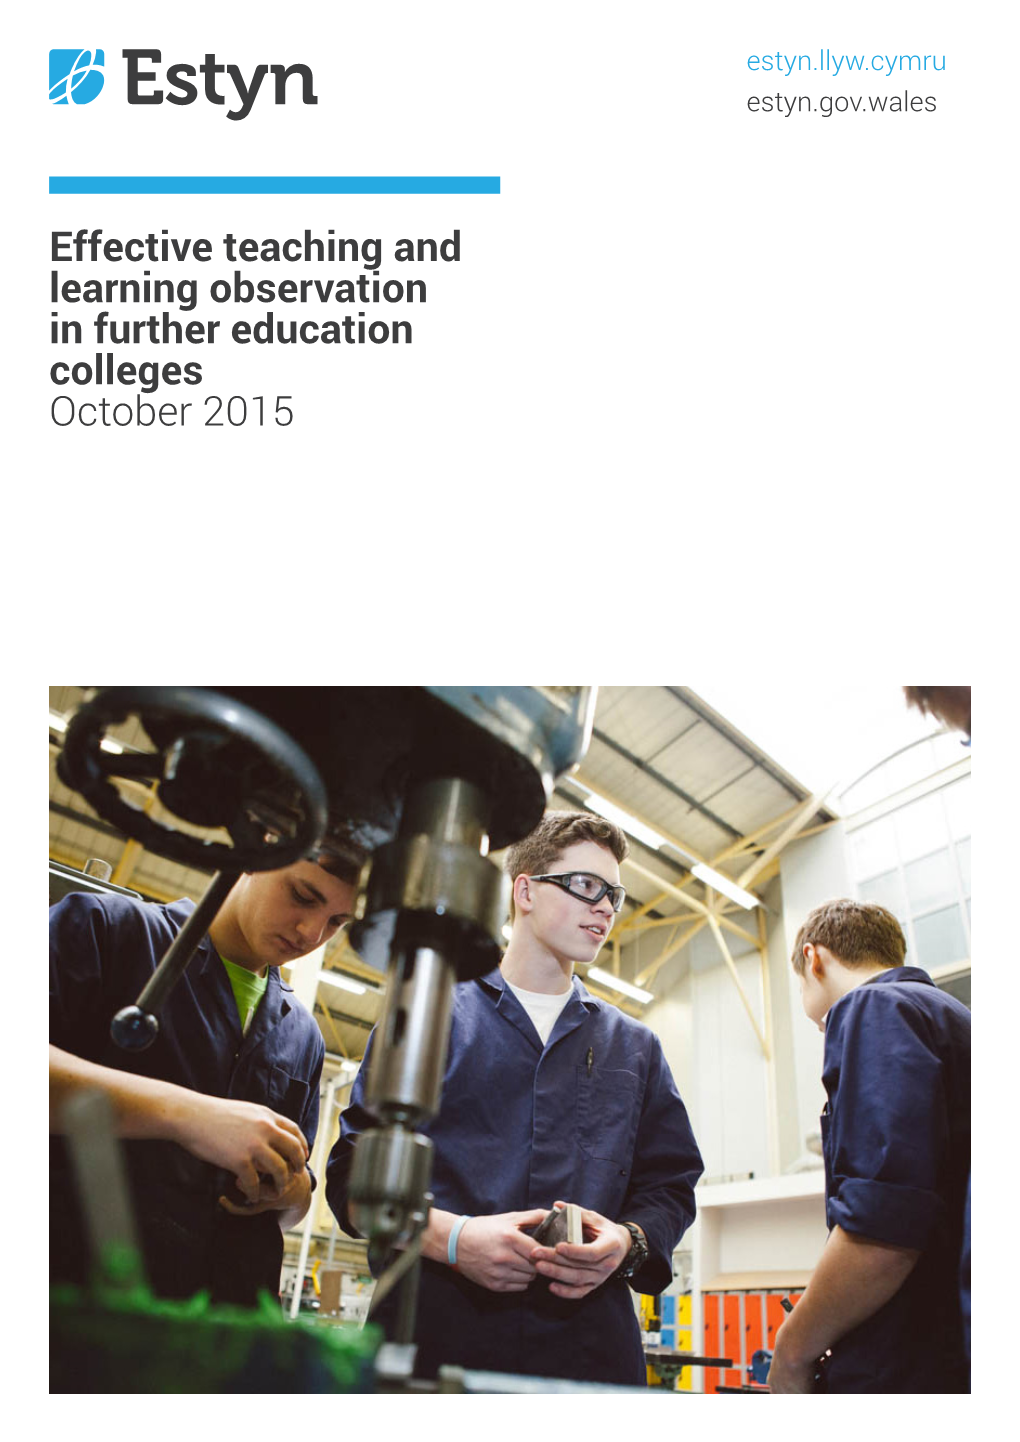 Effective Teaching and Learning Observations in Further Education (FE) Colleges